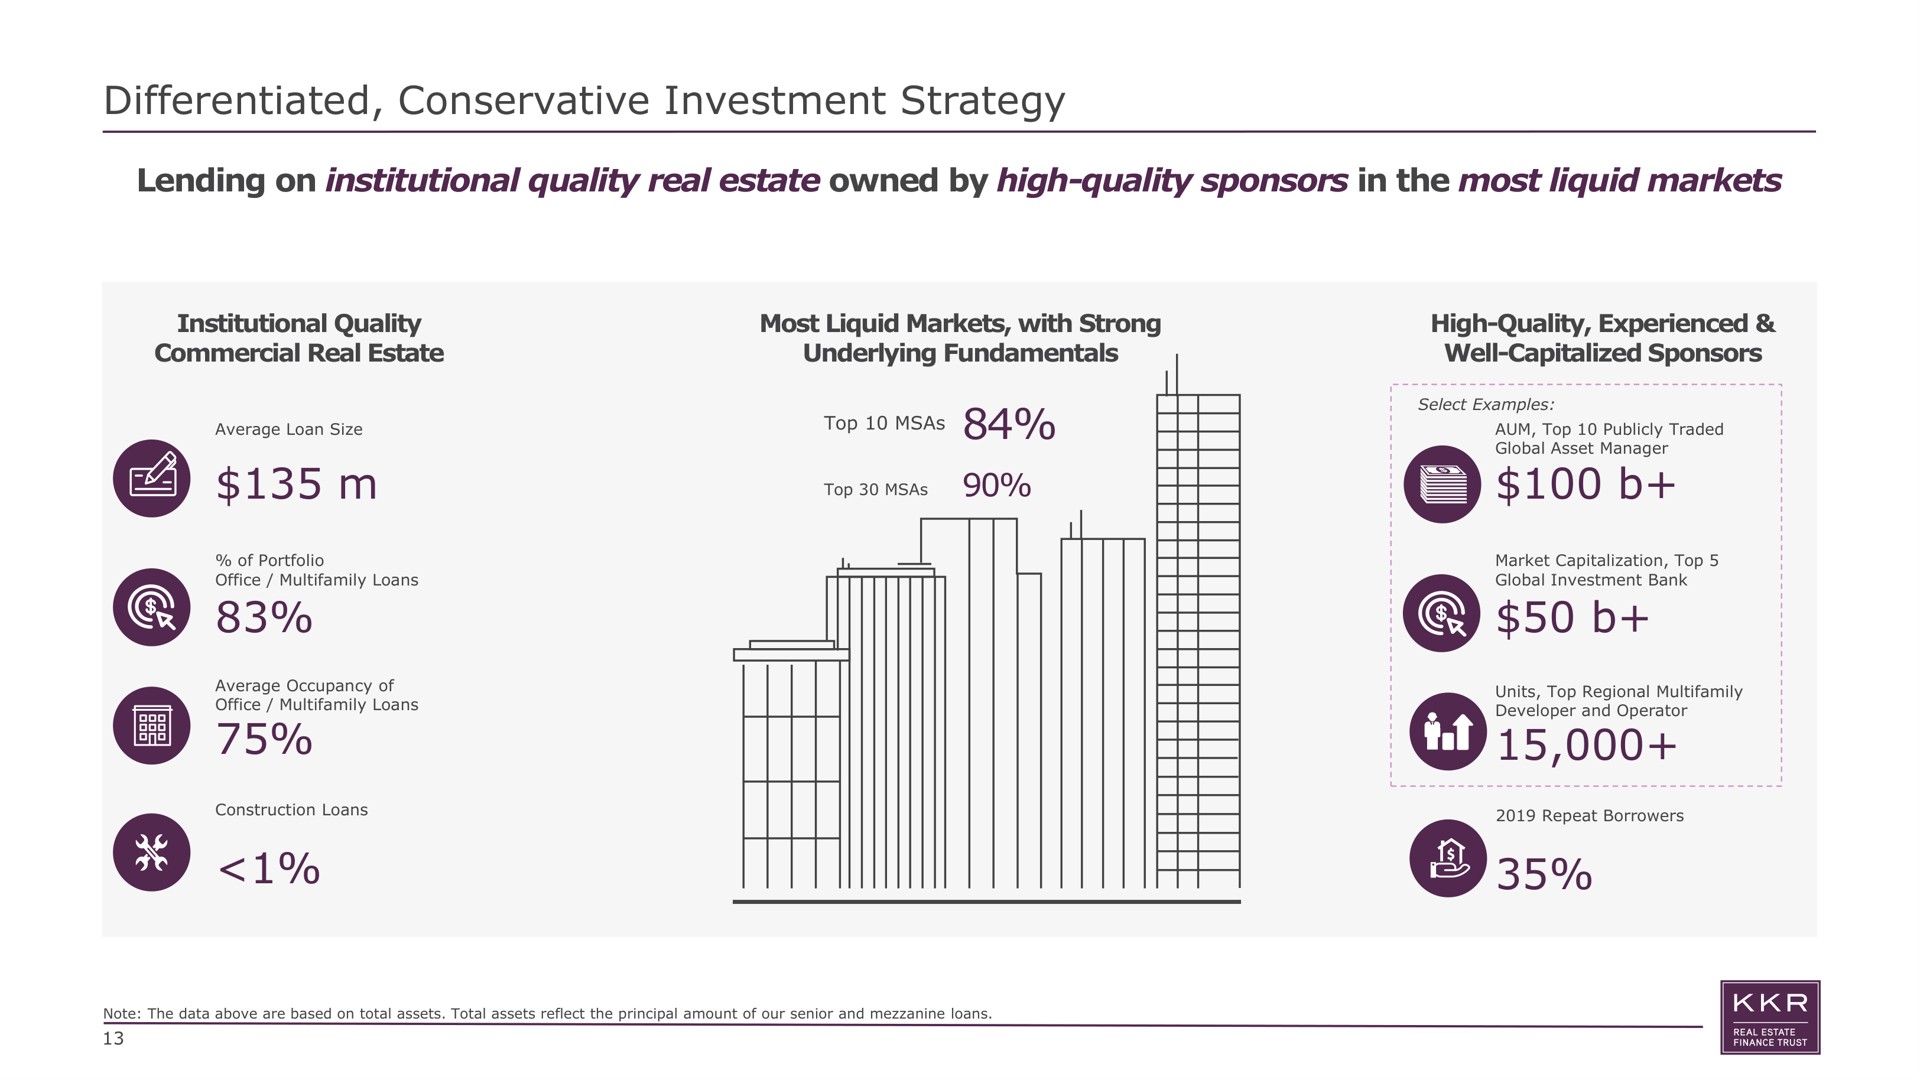 differentiated conservative investment strategy lending on institutional quality real estate owned by high quality sponsors in the most liquid markets commercial with strong underlying fundamentals experienced well capitalized | KKR Real Estate Finance Trust